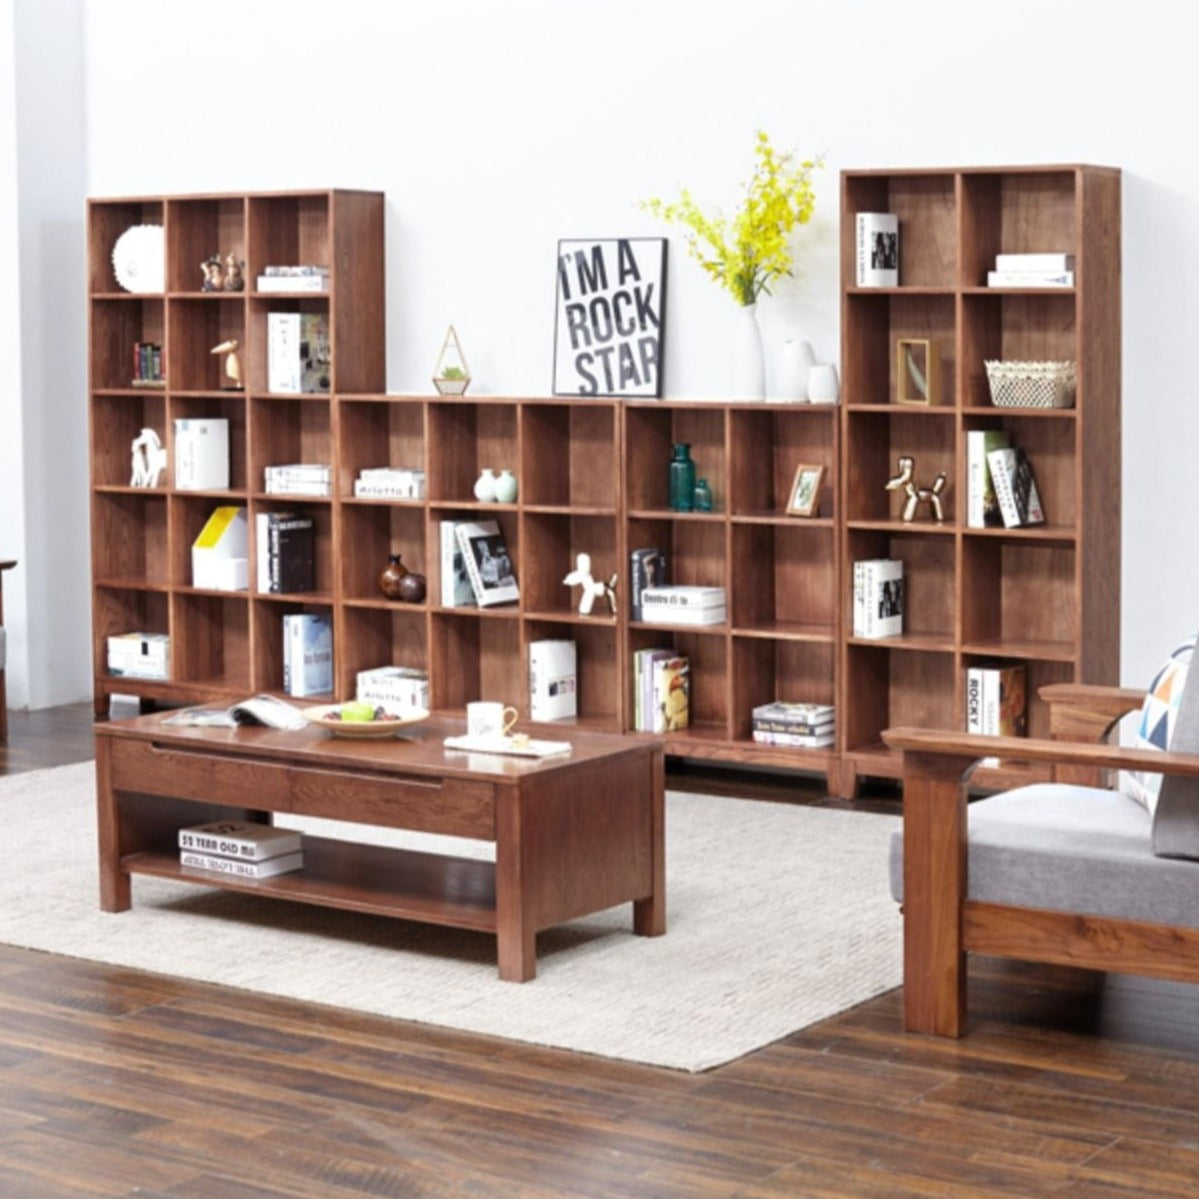 Oak solid wood bookcase free combination grid bookcase"